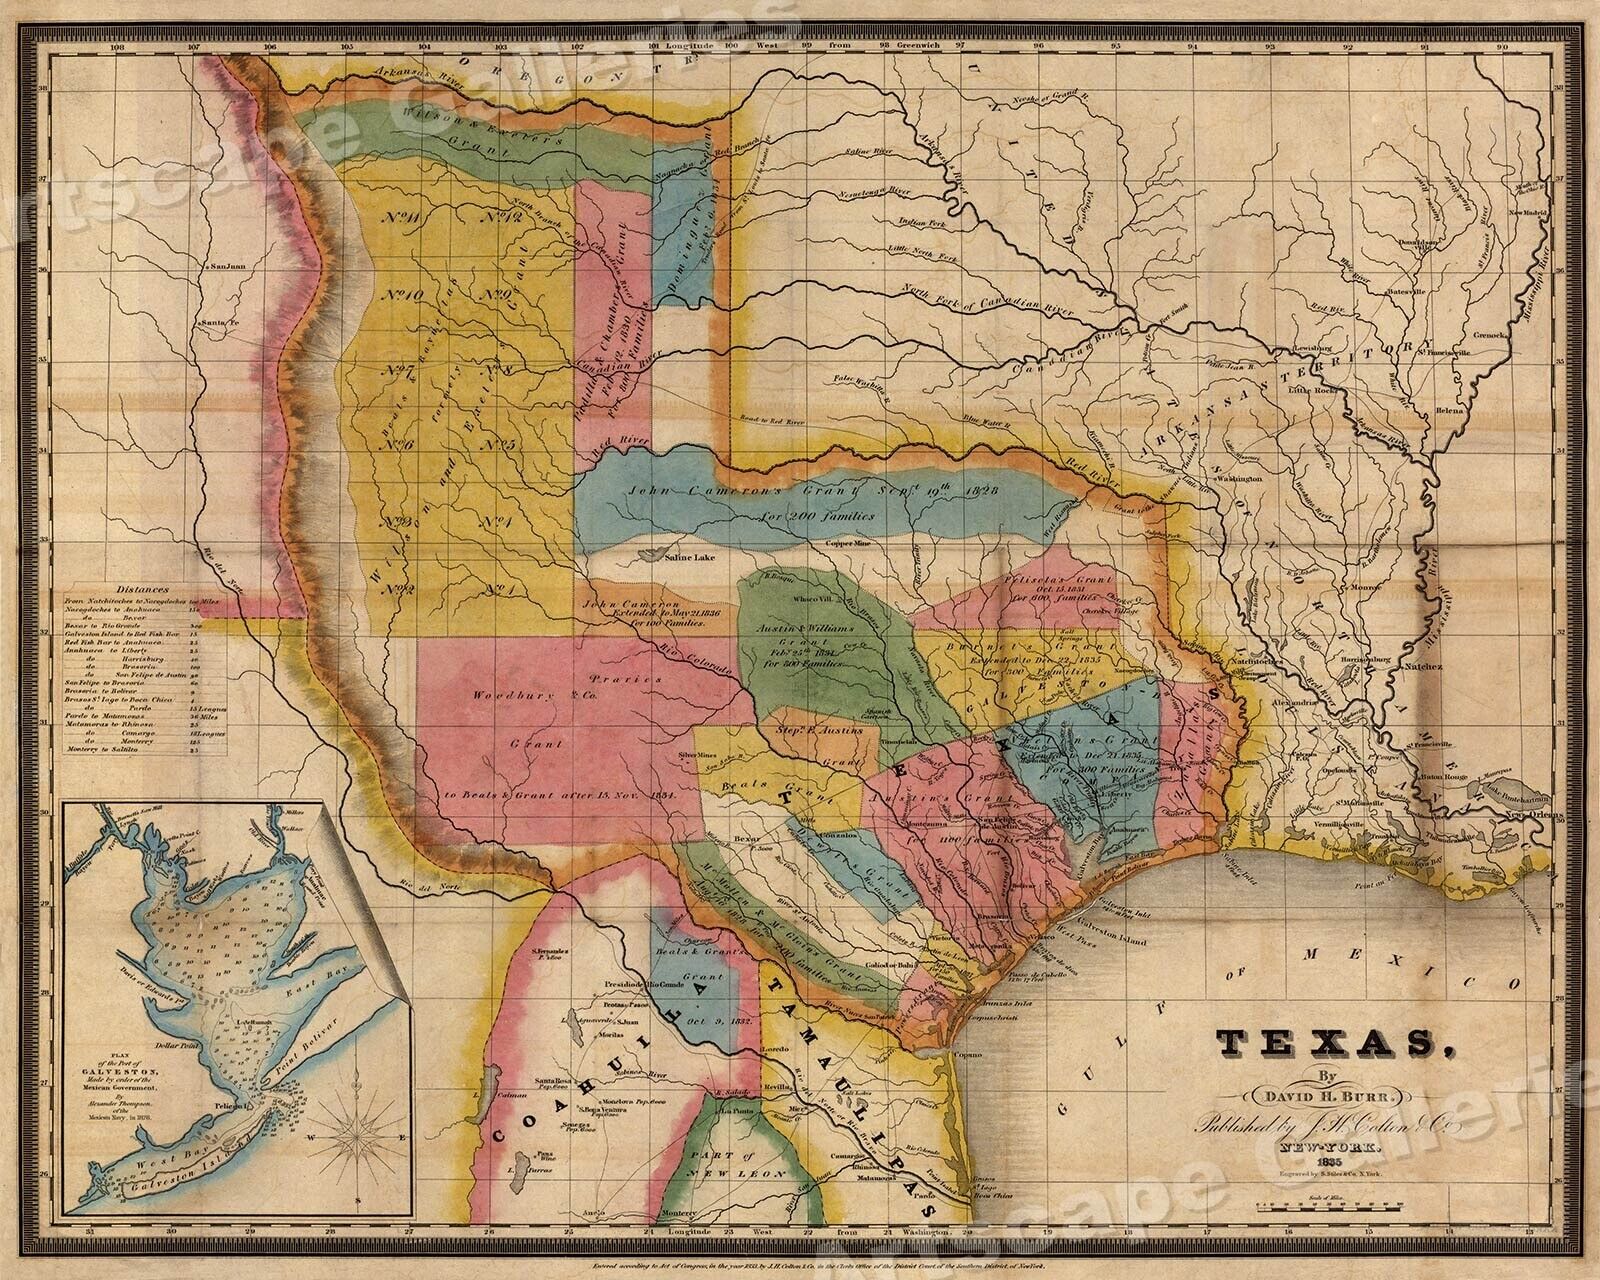 1835 Territory of Texas - Map of Land Grants - 24x30